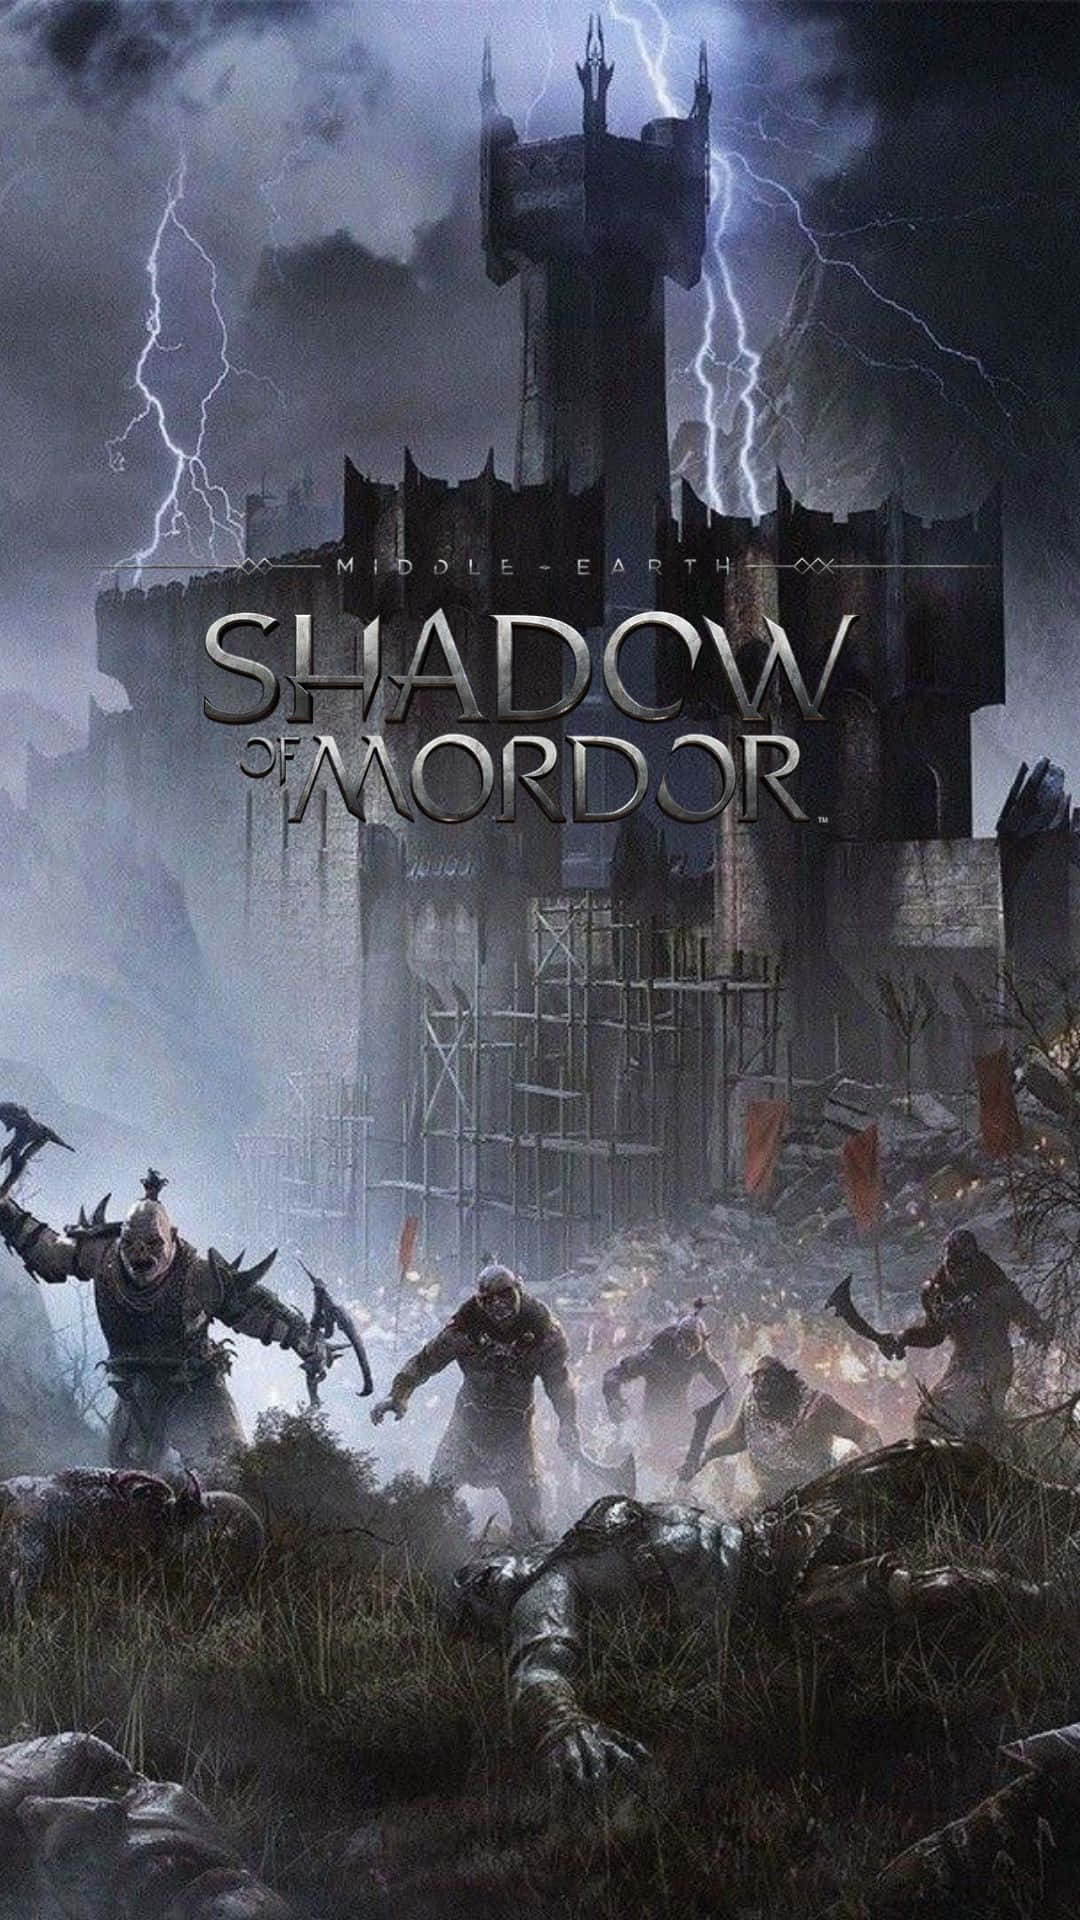 Brave the Epic Story of Middle-Earth with Android Shadow of Mordor